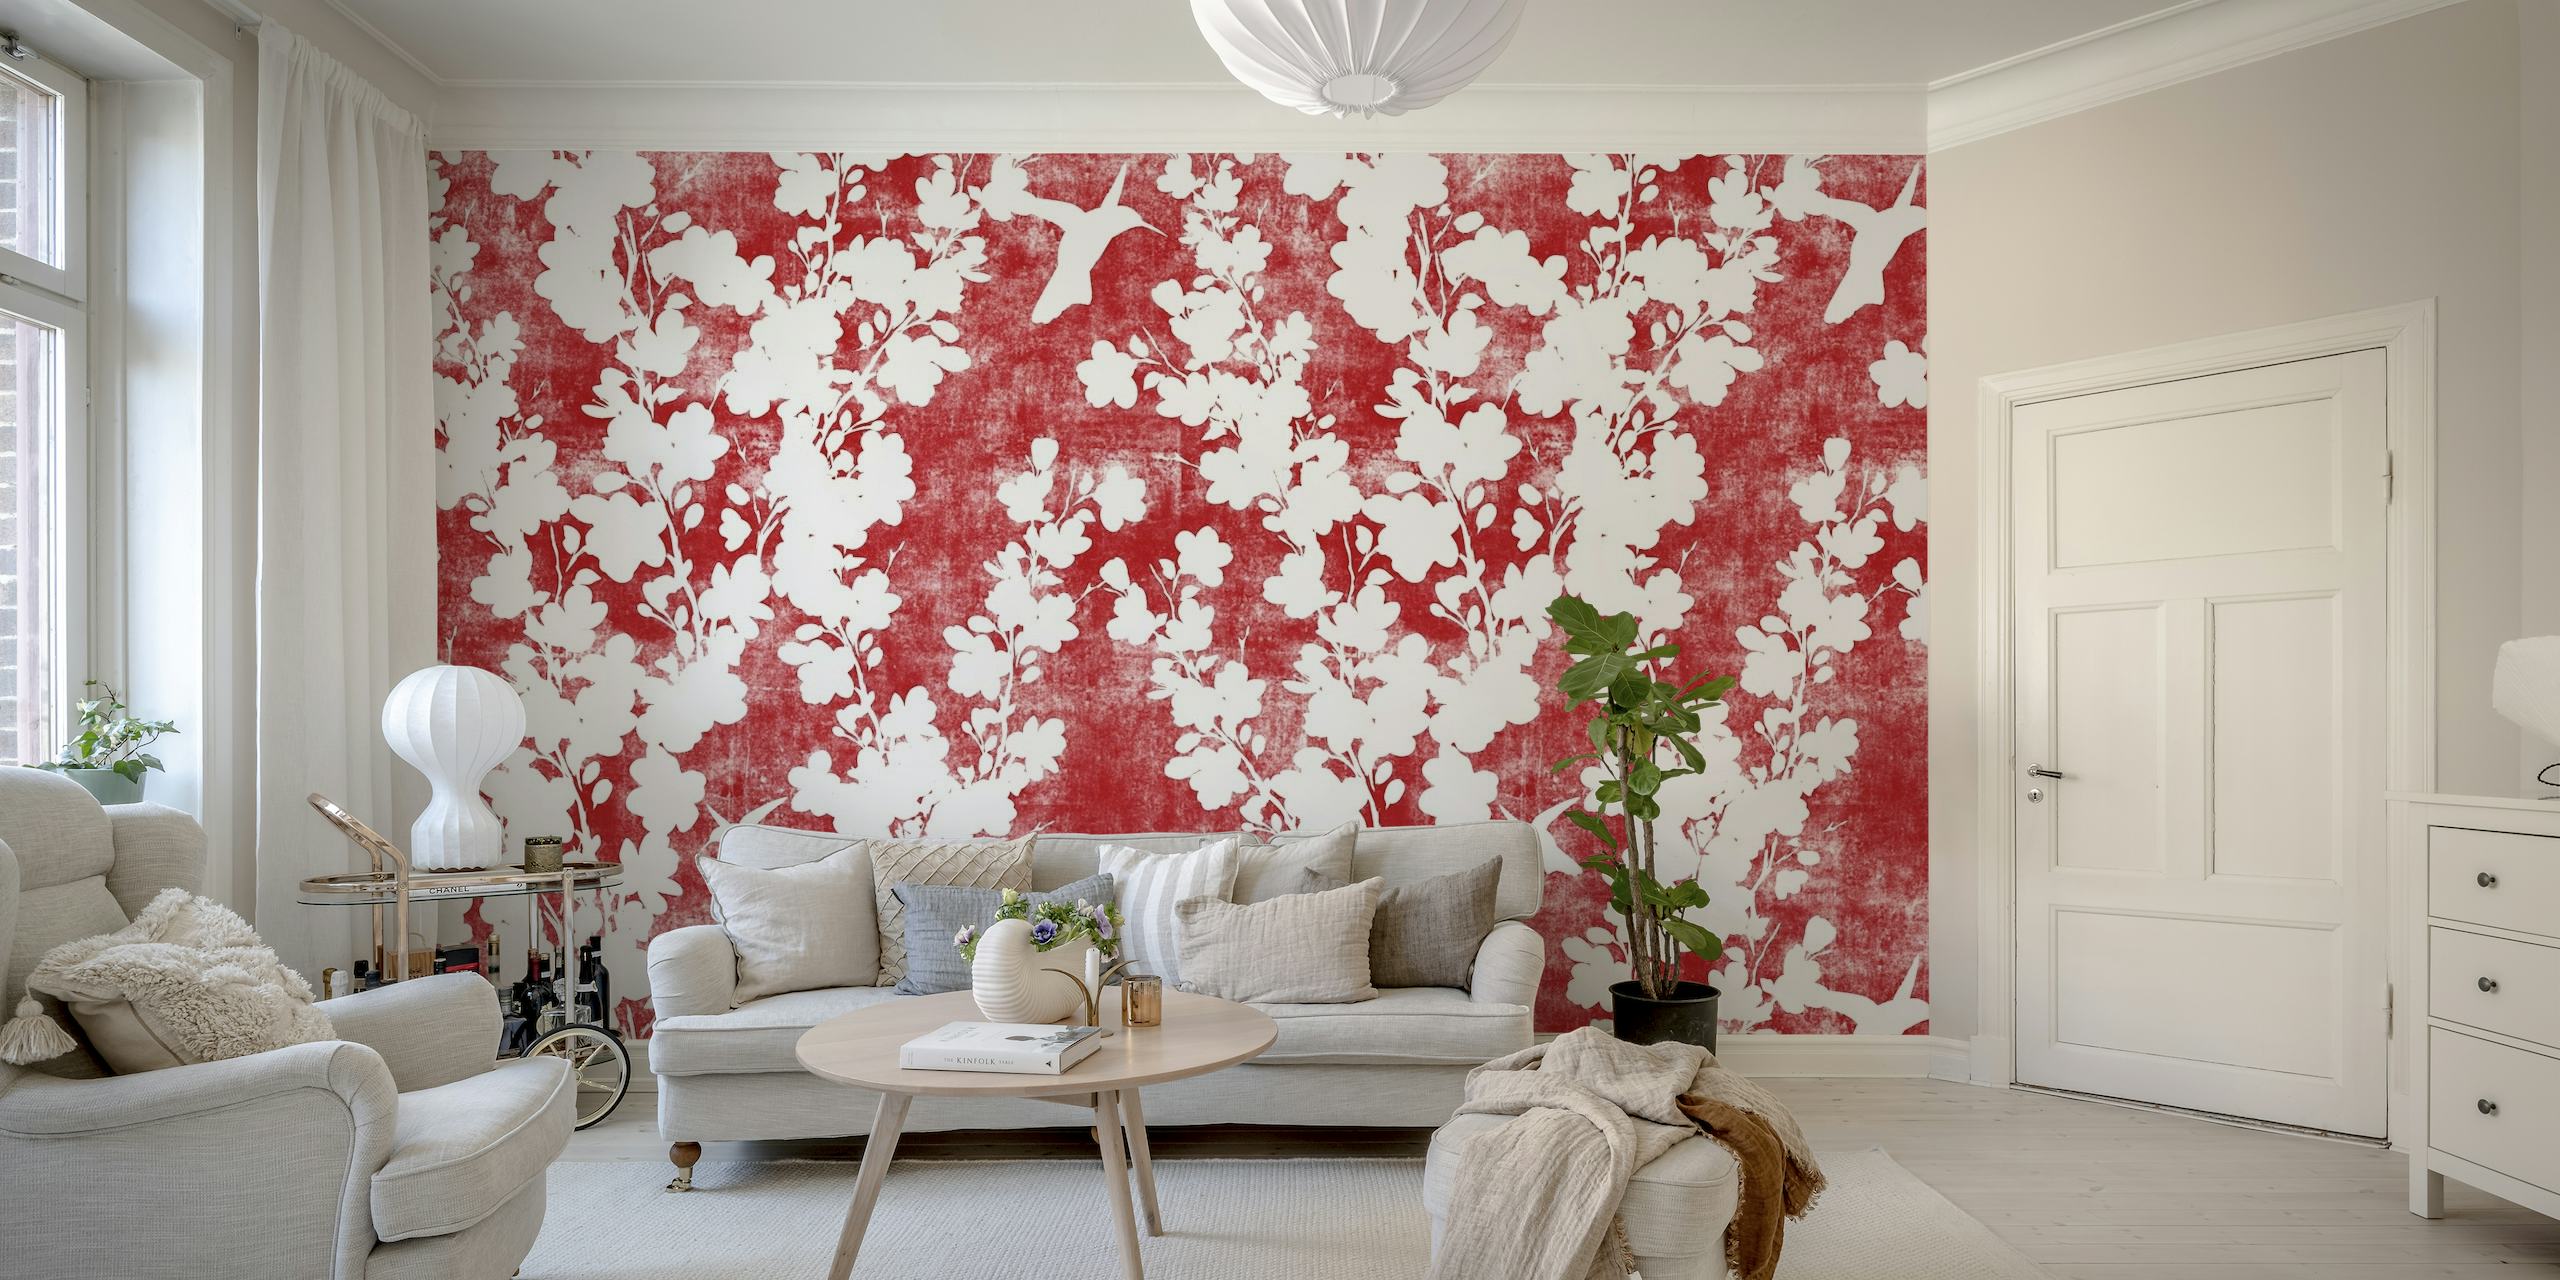 Scarlet red cherry blossom silhouette papiers peint